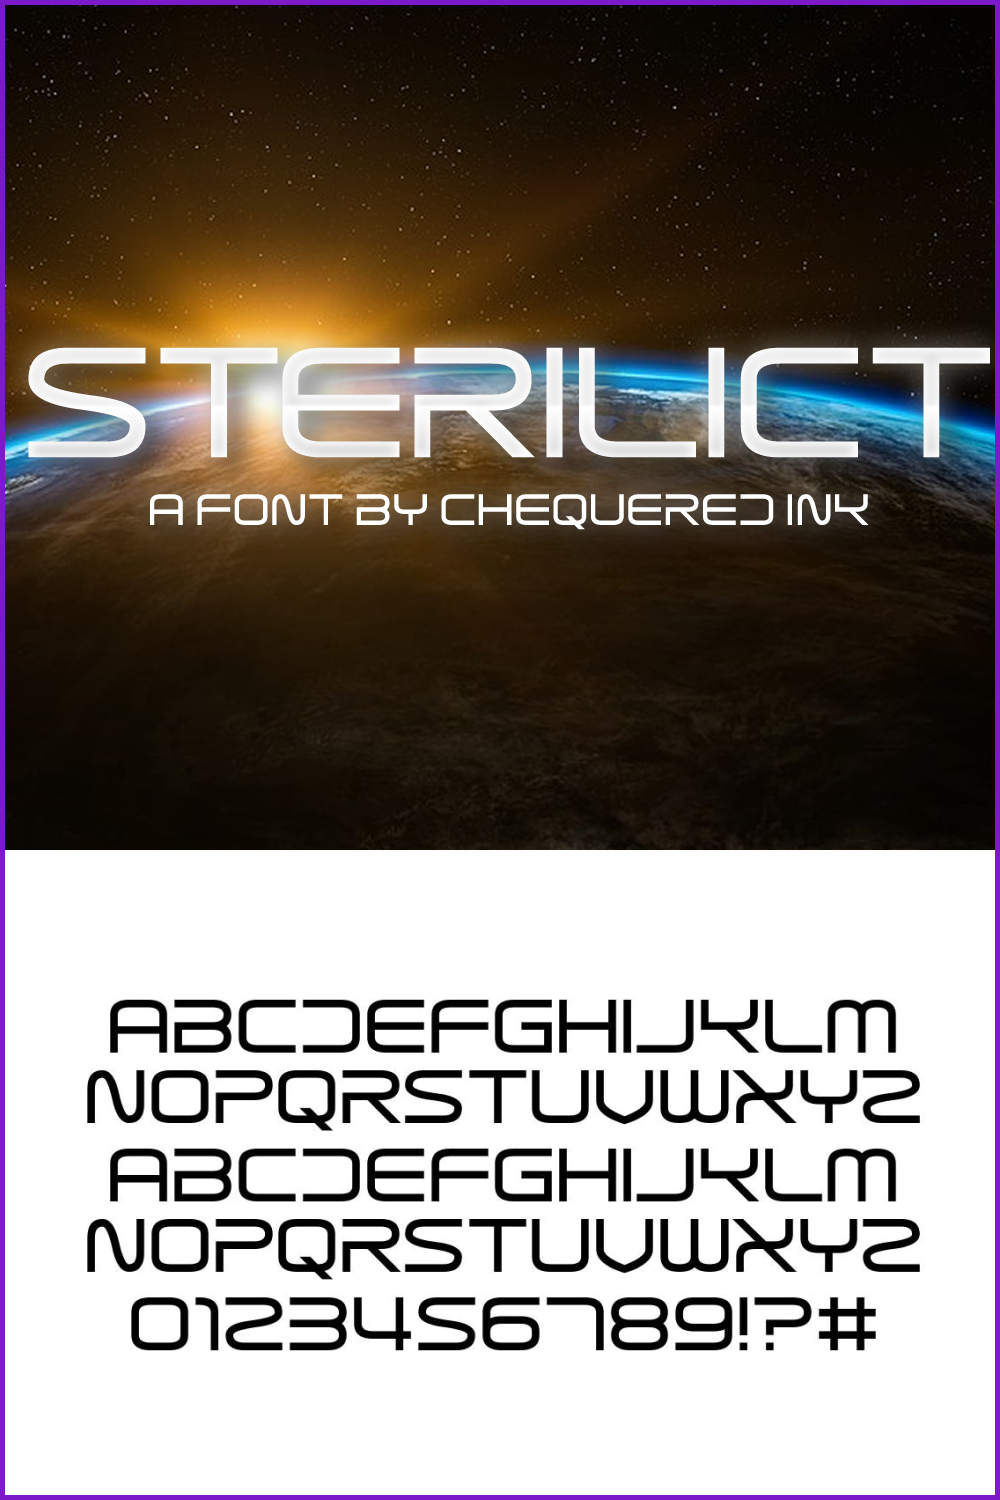 An example of a Sterilict font on a white background and on the background of the Earth.